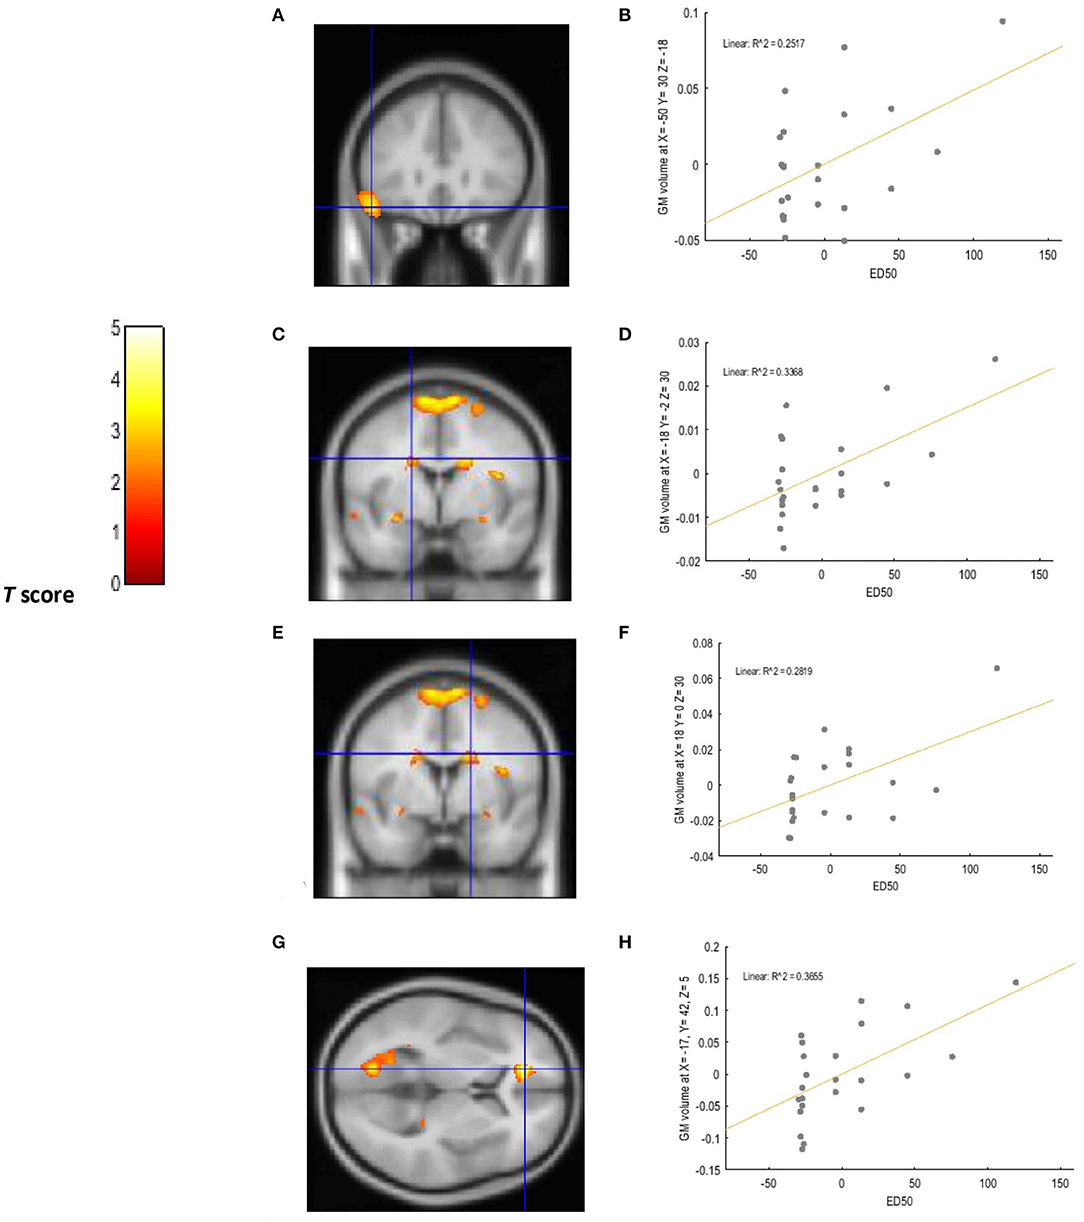 Frontiers | Neuroanatomical of Impulsive Choices and Risky Decision Making in Young Chronic Tobacco Smokers: A Voxel-Based Study Psychiatry